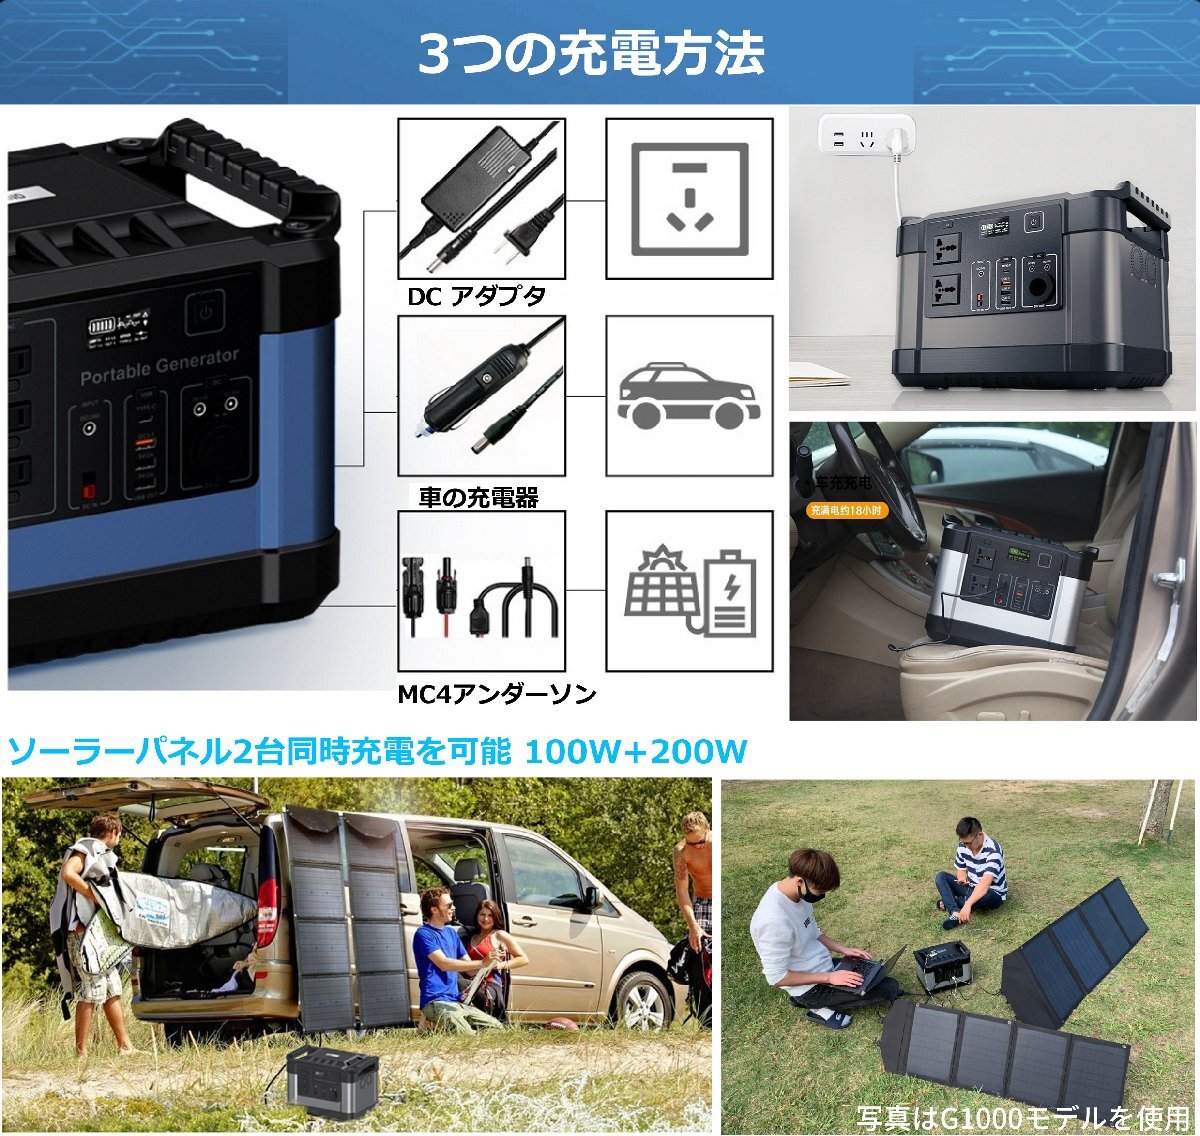  disaster disaster prevention evacuation portable power supply 50W solar panel [ free shipping ]